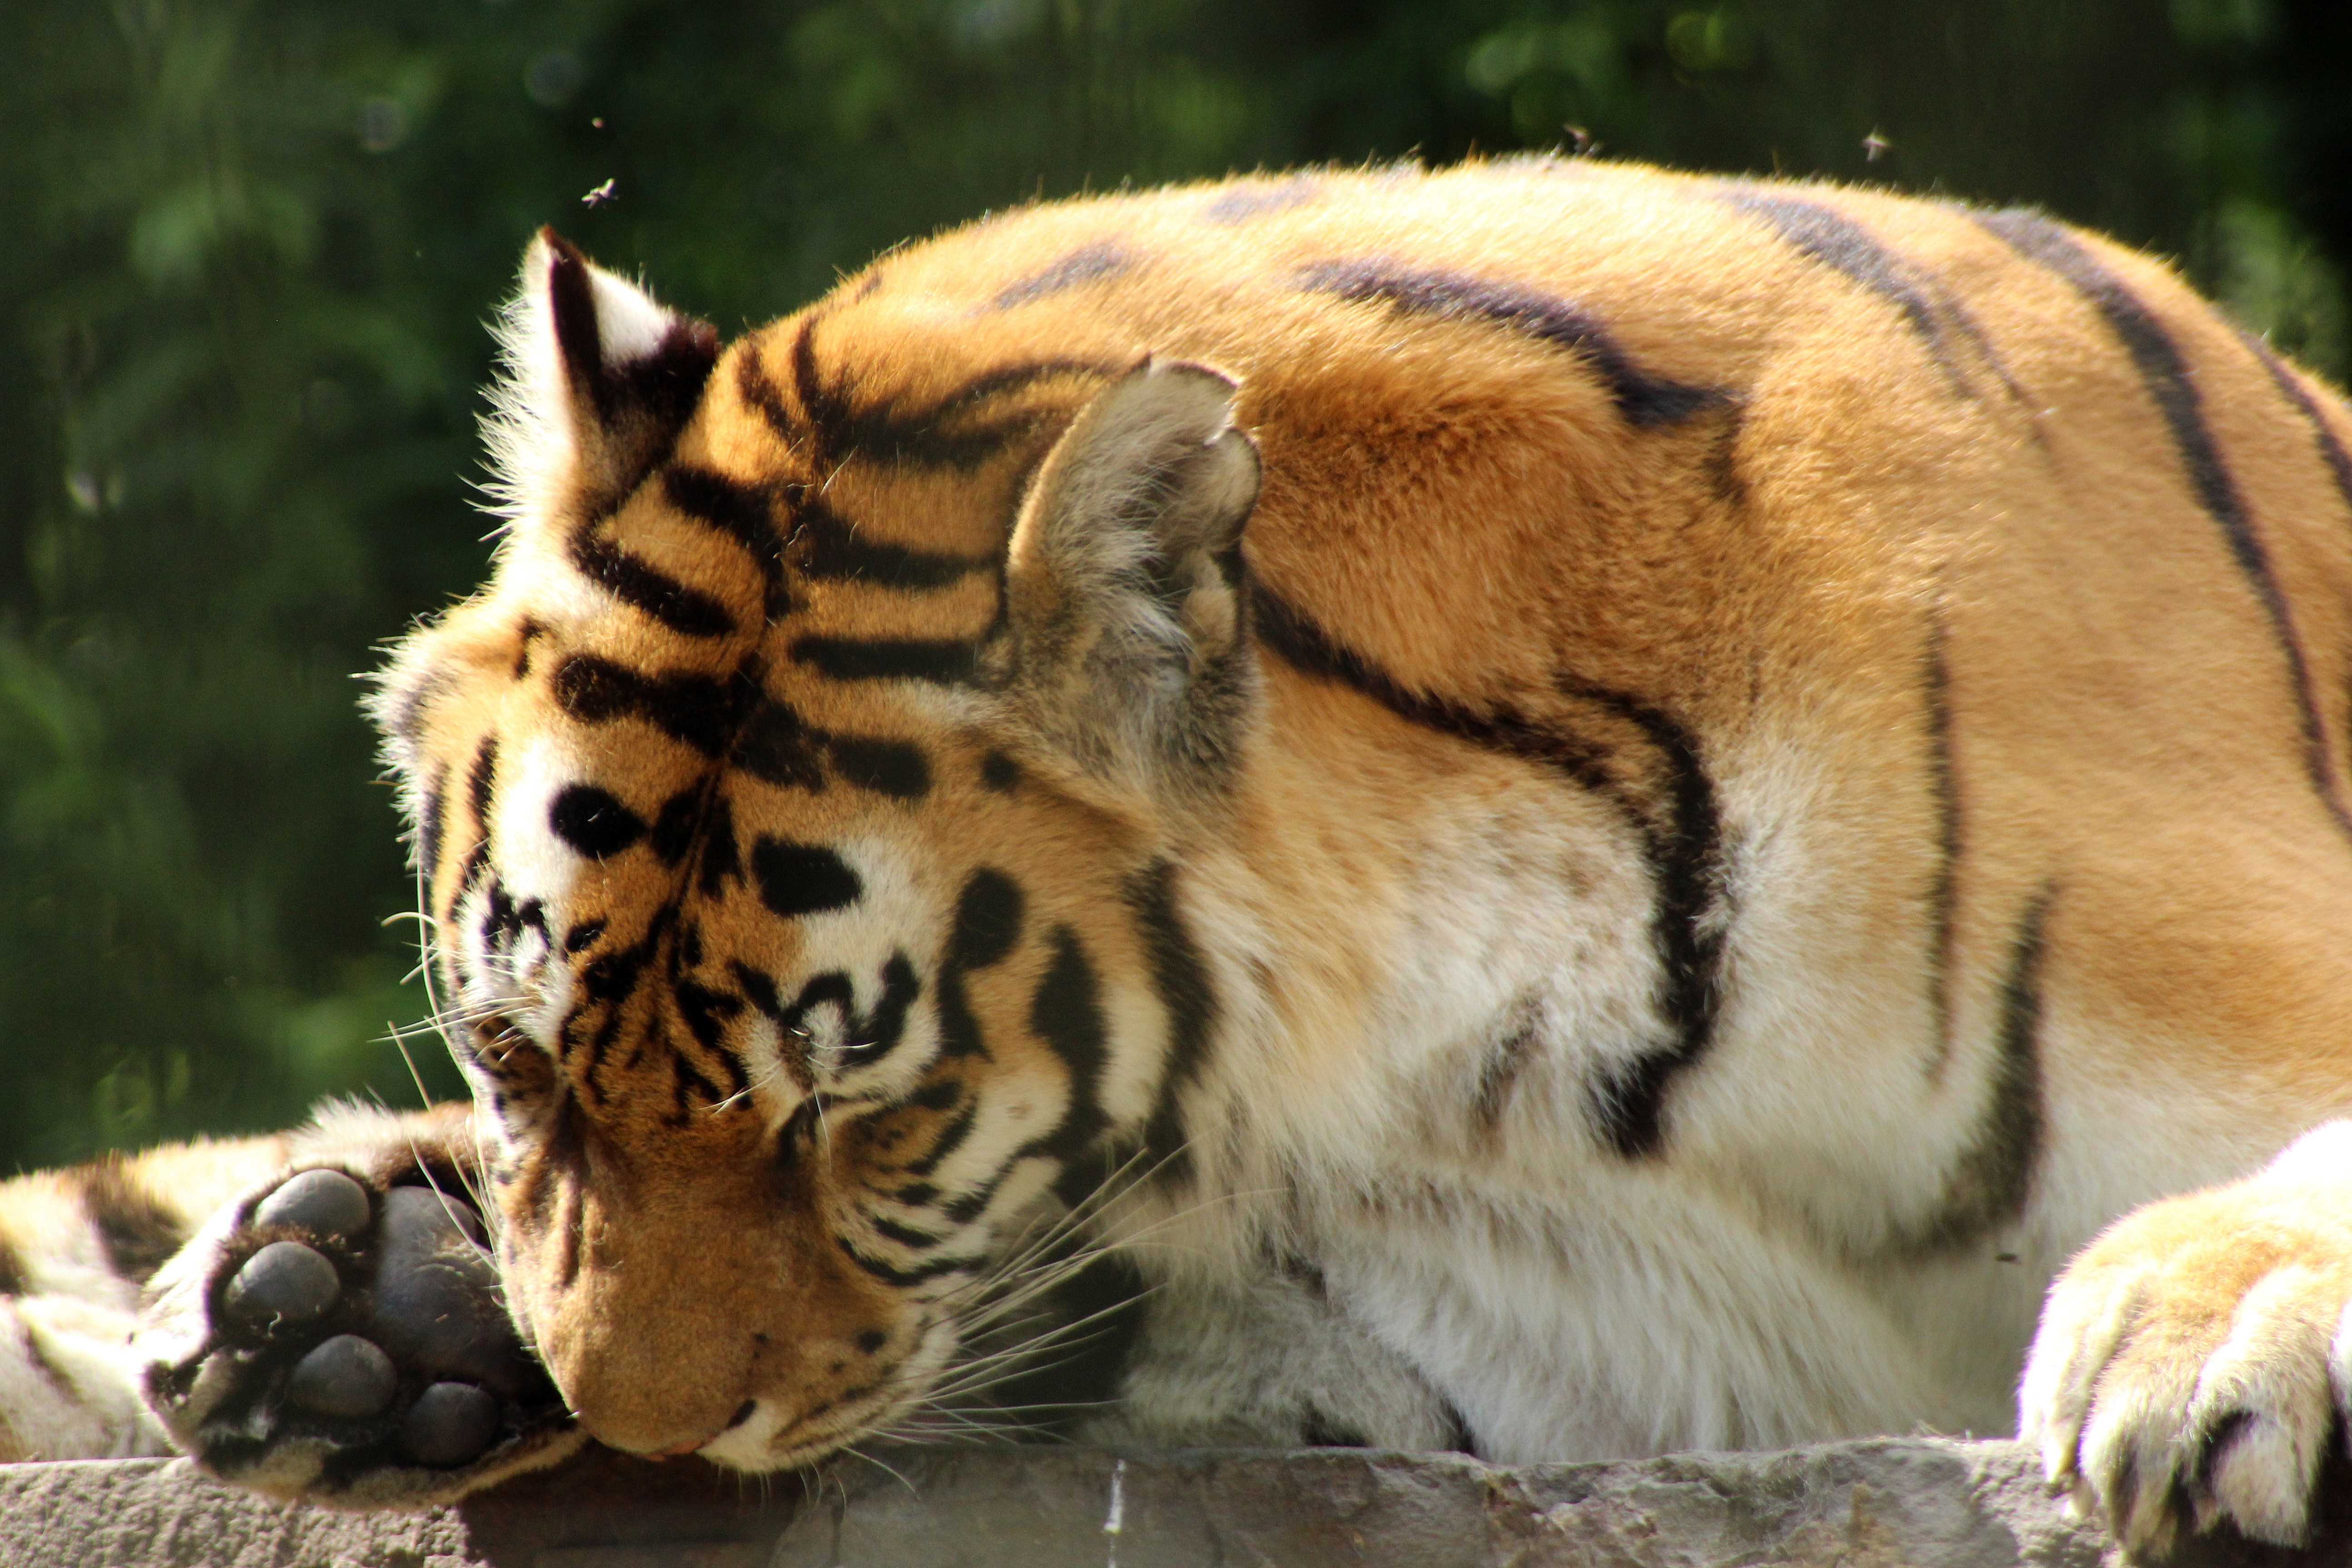 Tiger in the zoo photo